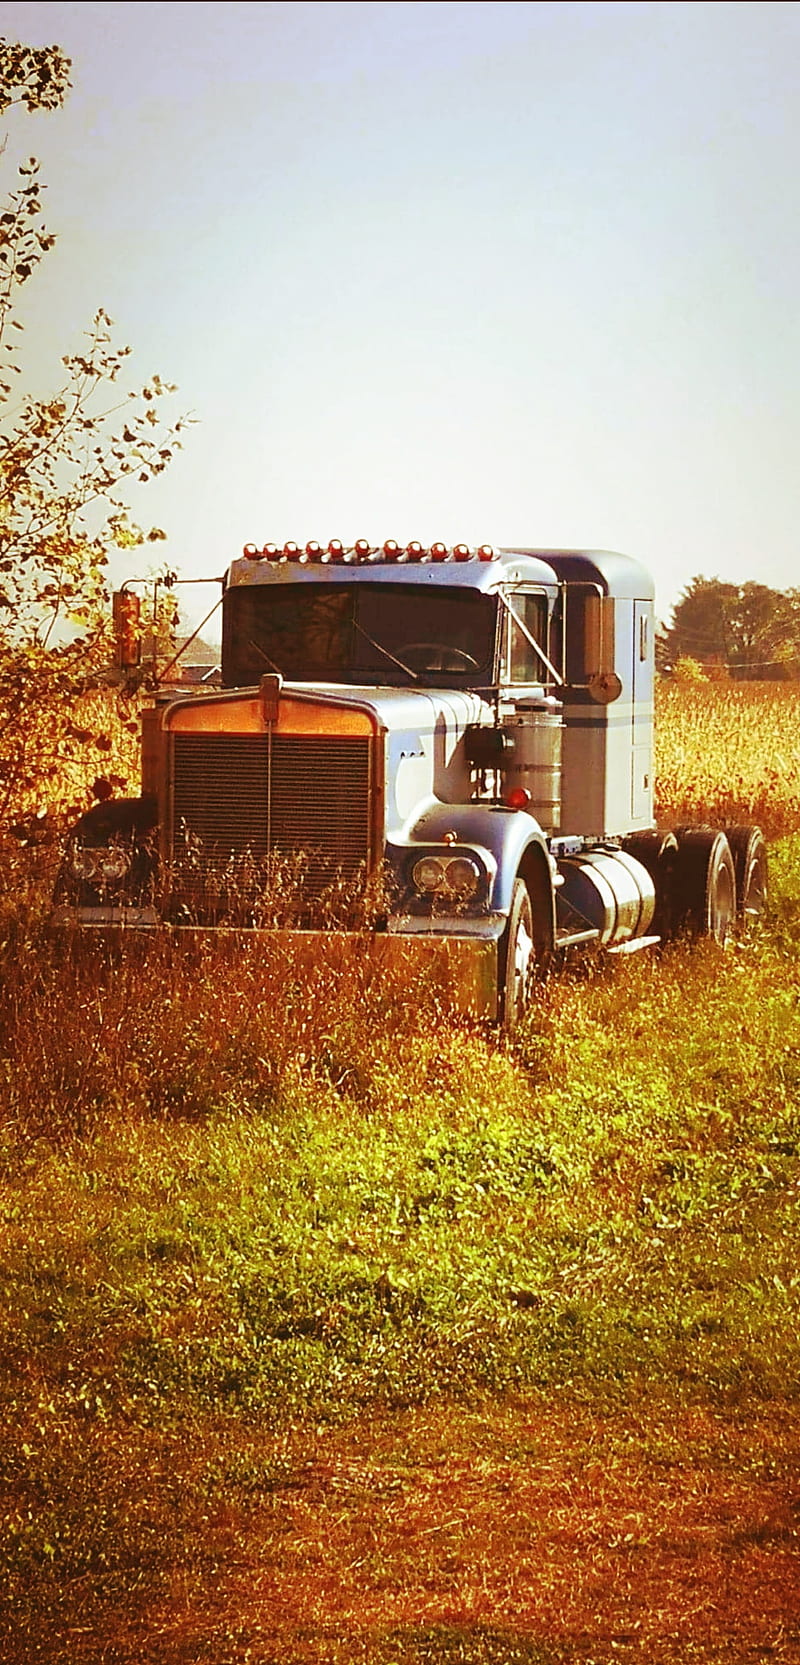 Six Beautiful Kenworth Trucks Parked On The Edge Of A Dirt Field  Background Pictures Of Trucks Background Image And Wallpaper for Free  Download